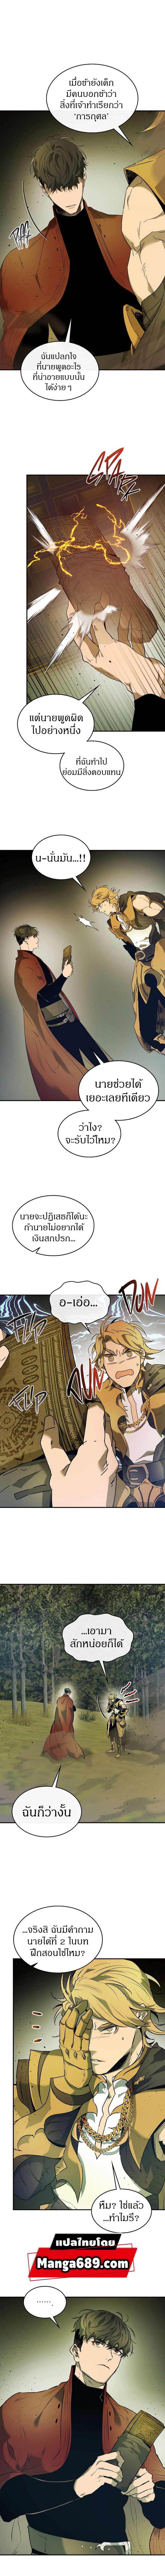 Leveling With The Gods - หน้า 3